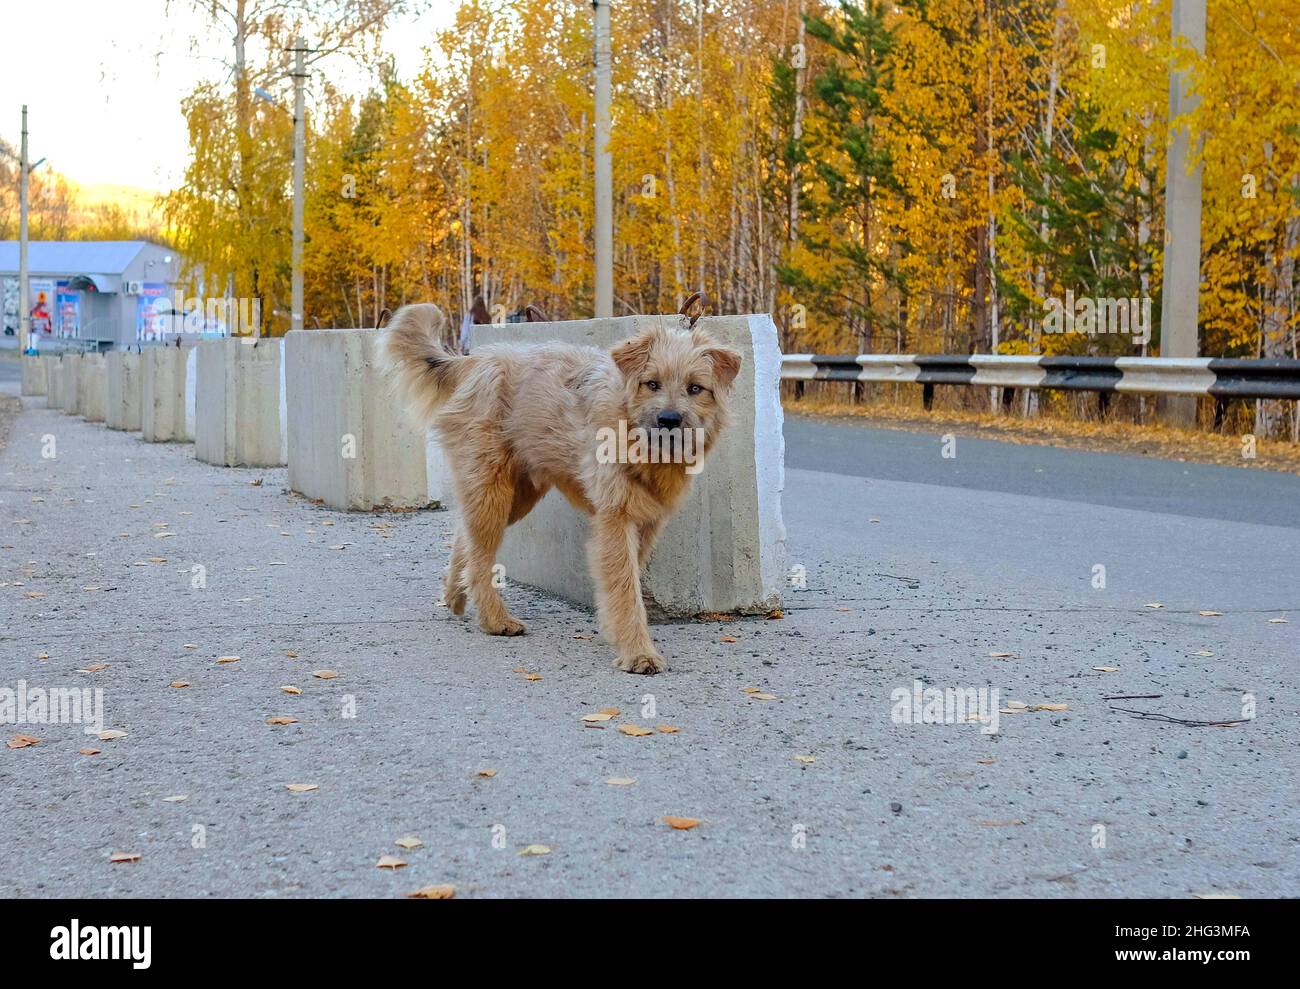 Homeless dog on the road. Autumn blurred trees in the background. Stock Photo